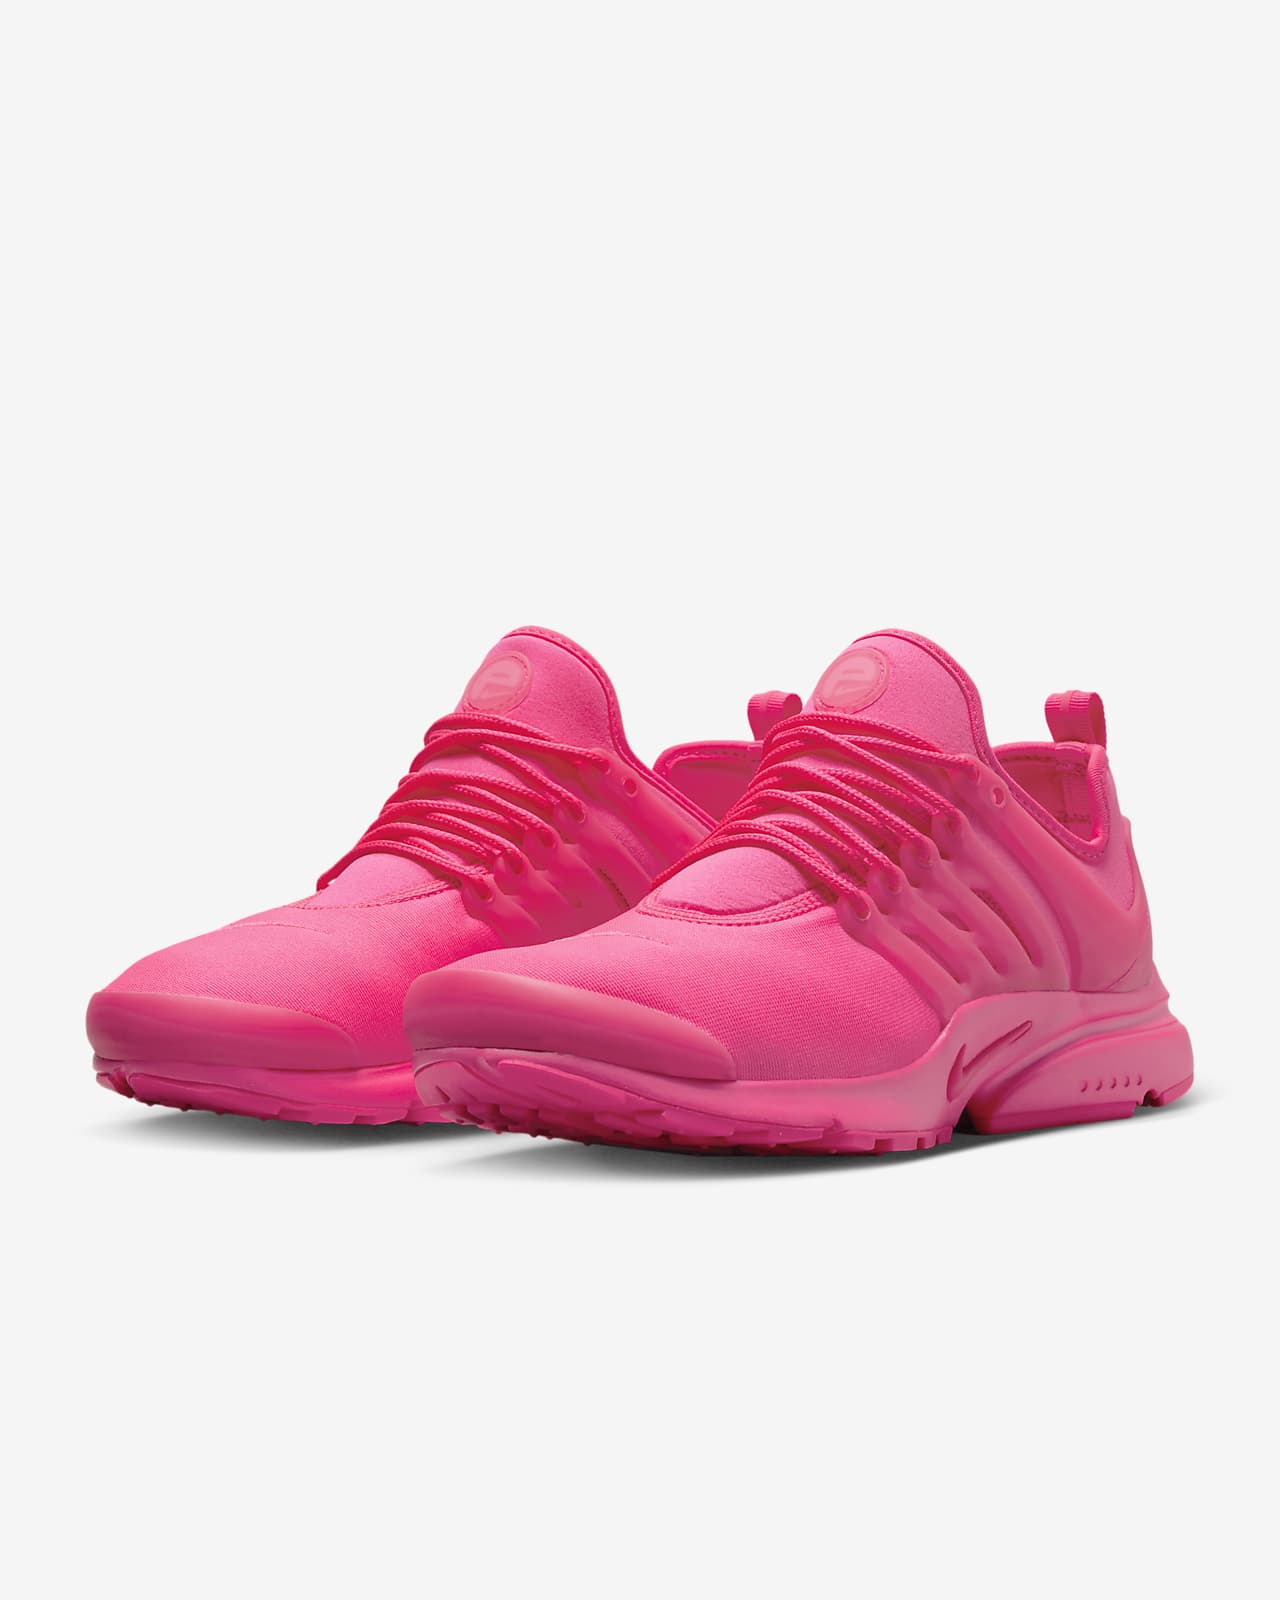 nike presto pink and blue